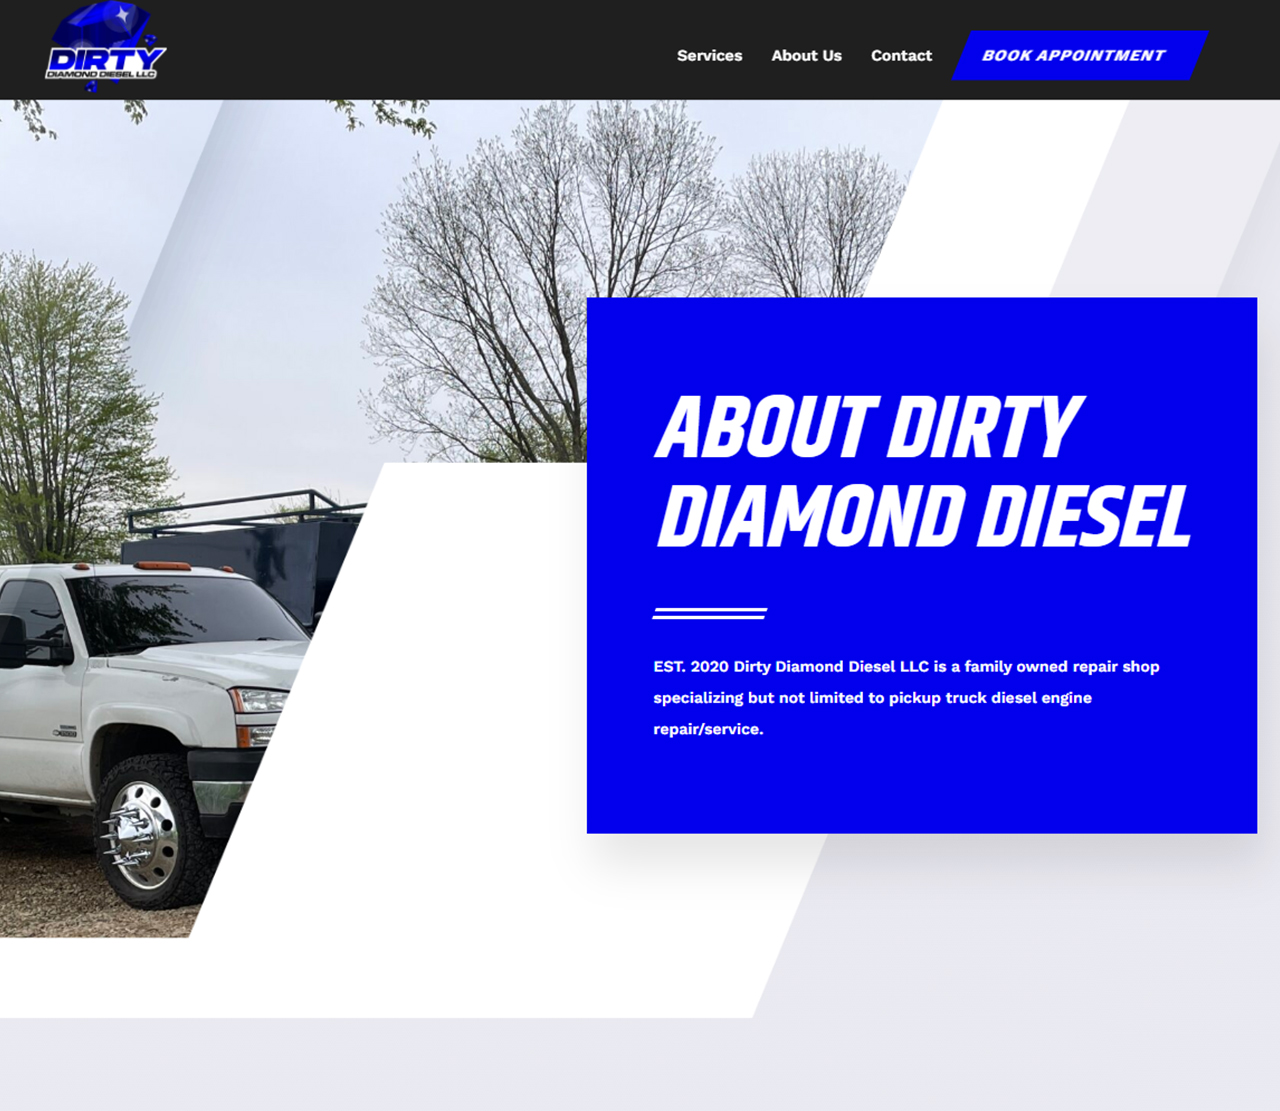 Dirty Diamond Diesel About Us Page